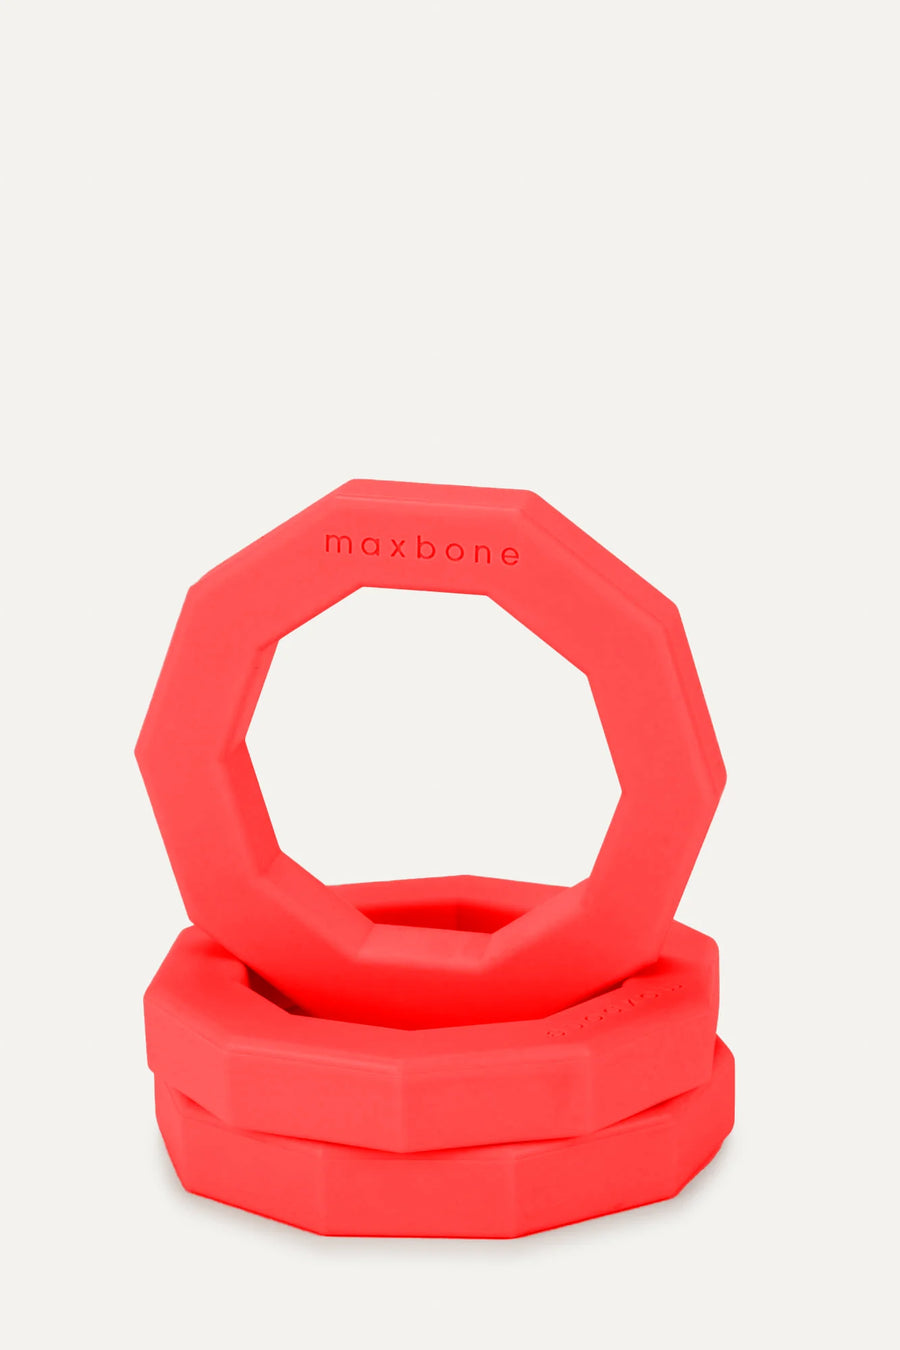 Maxbone Decagon Durable Dog Chew Toy in Red